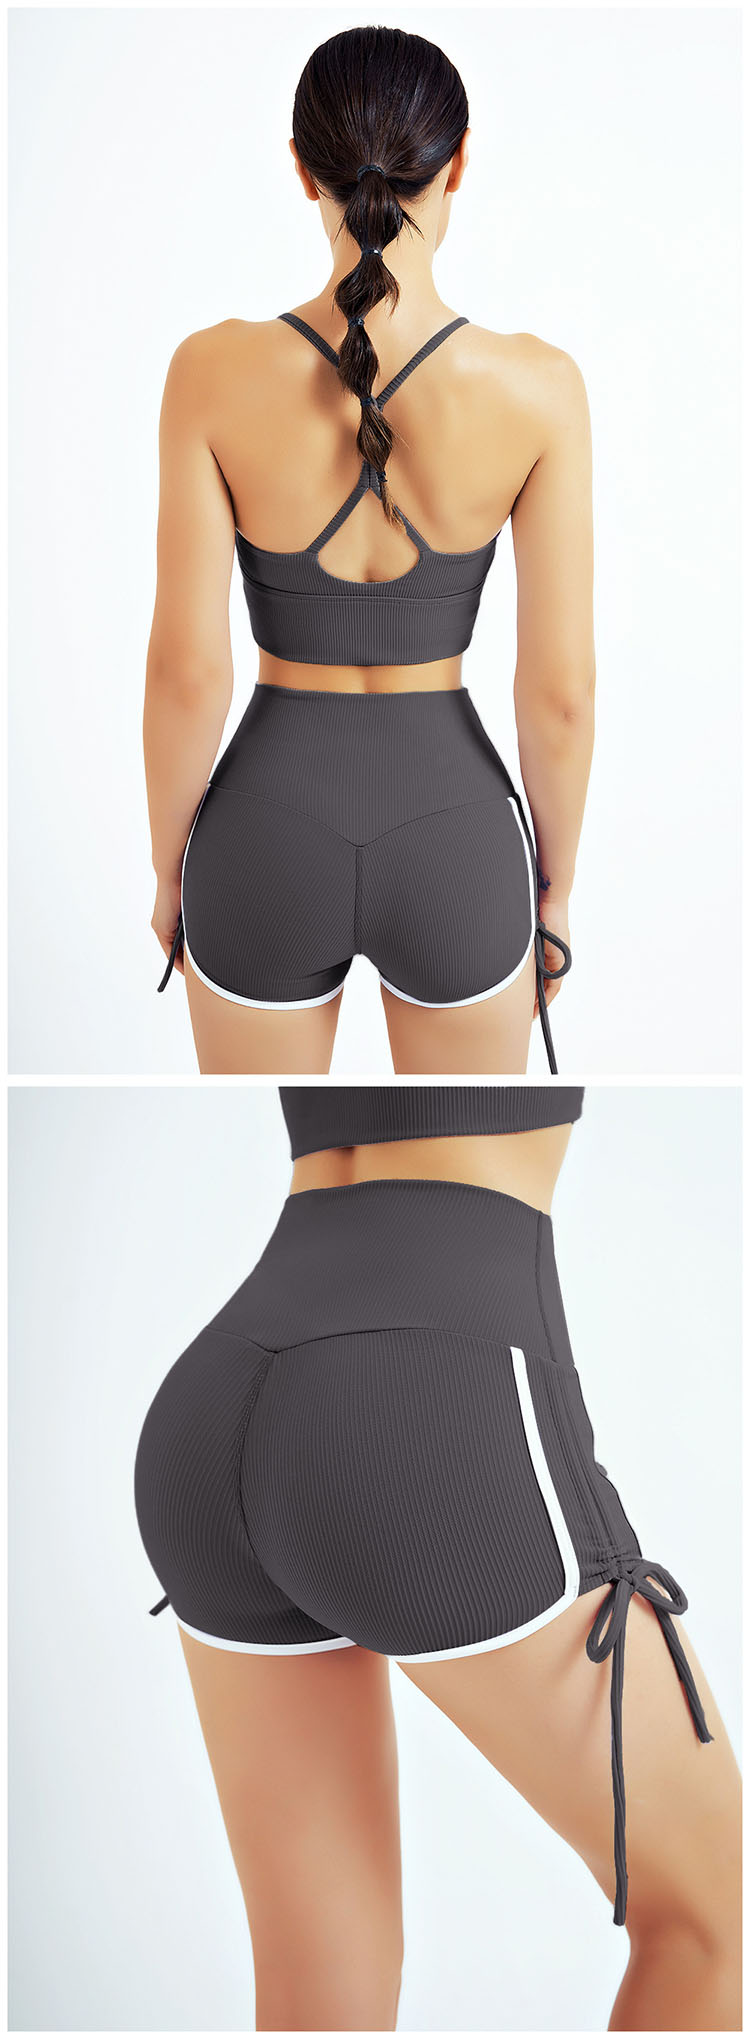 The hip-lifting design makes the buttocks stand out, creating a sexy buttock curve.